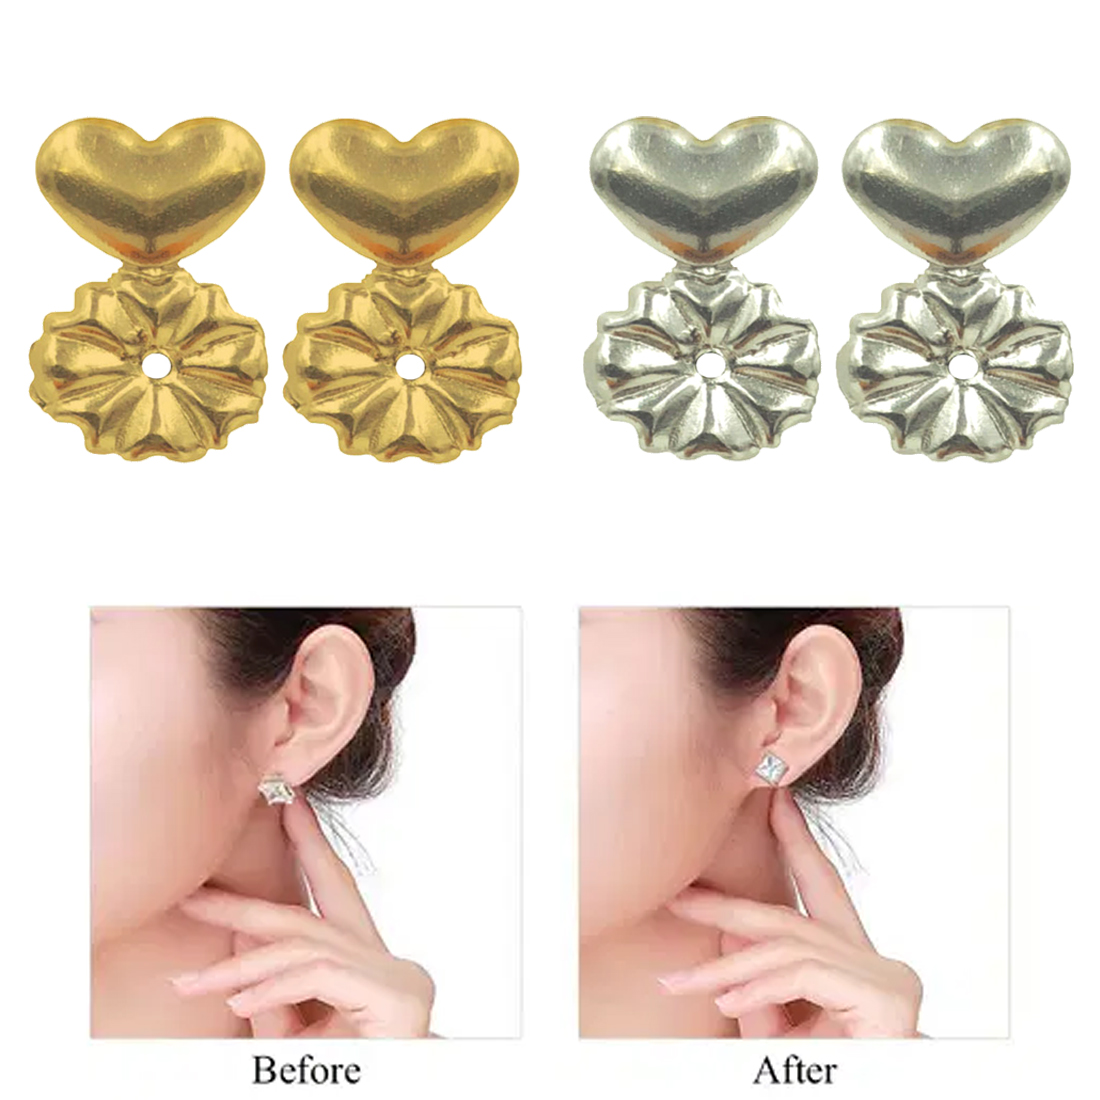 Toqueen Womens Earring Lifters - 2 Pairs of Adjustable Hypoallergenic Earring Lifts